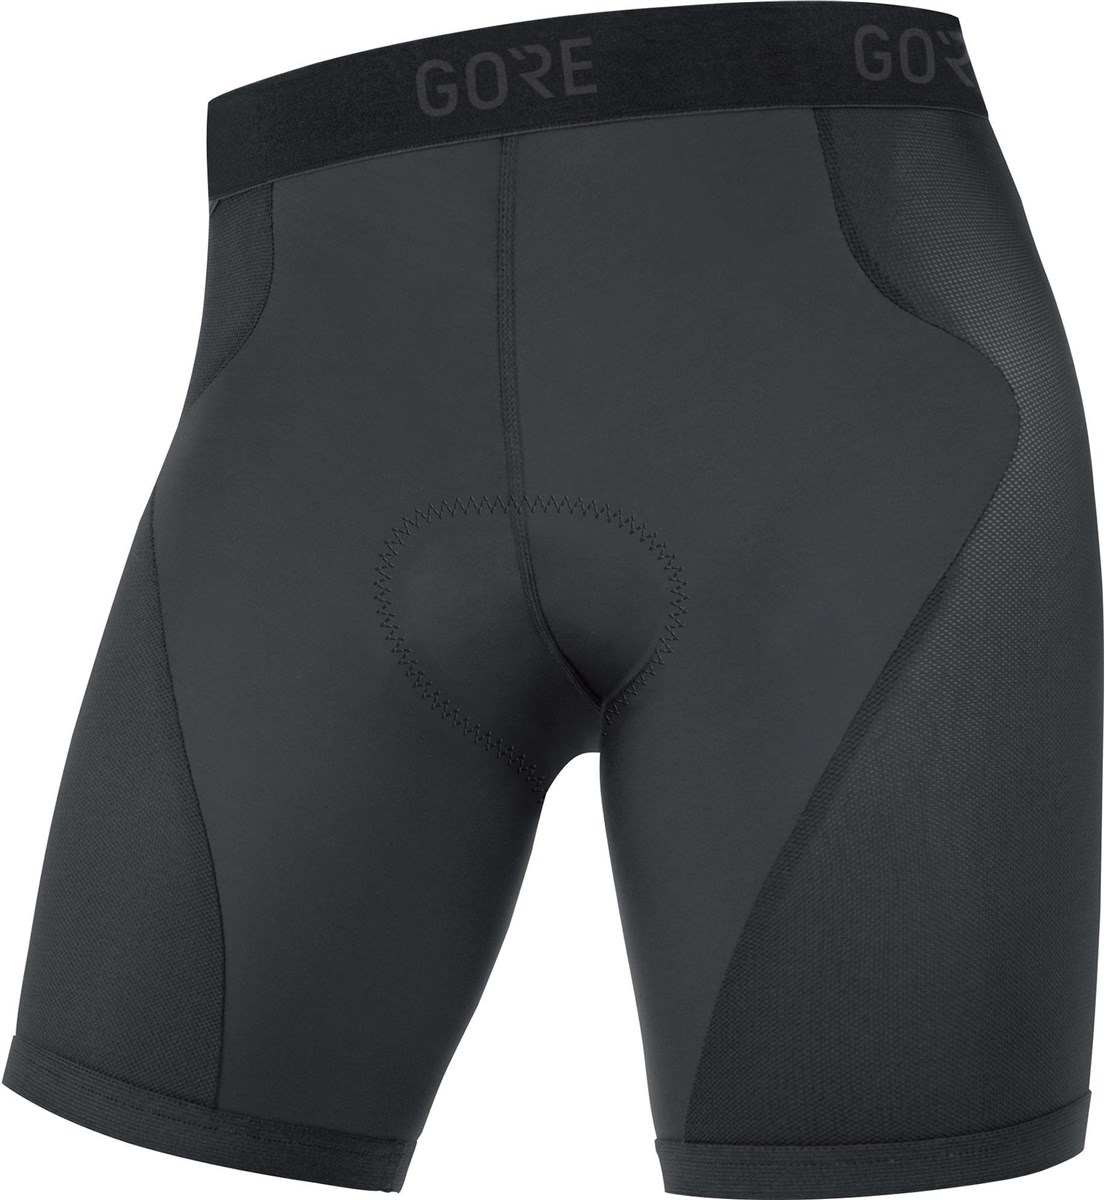 Gore C3 Liner Shorts product image